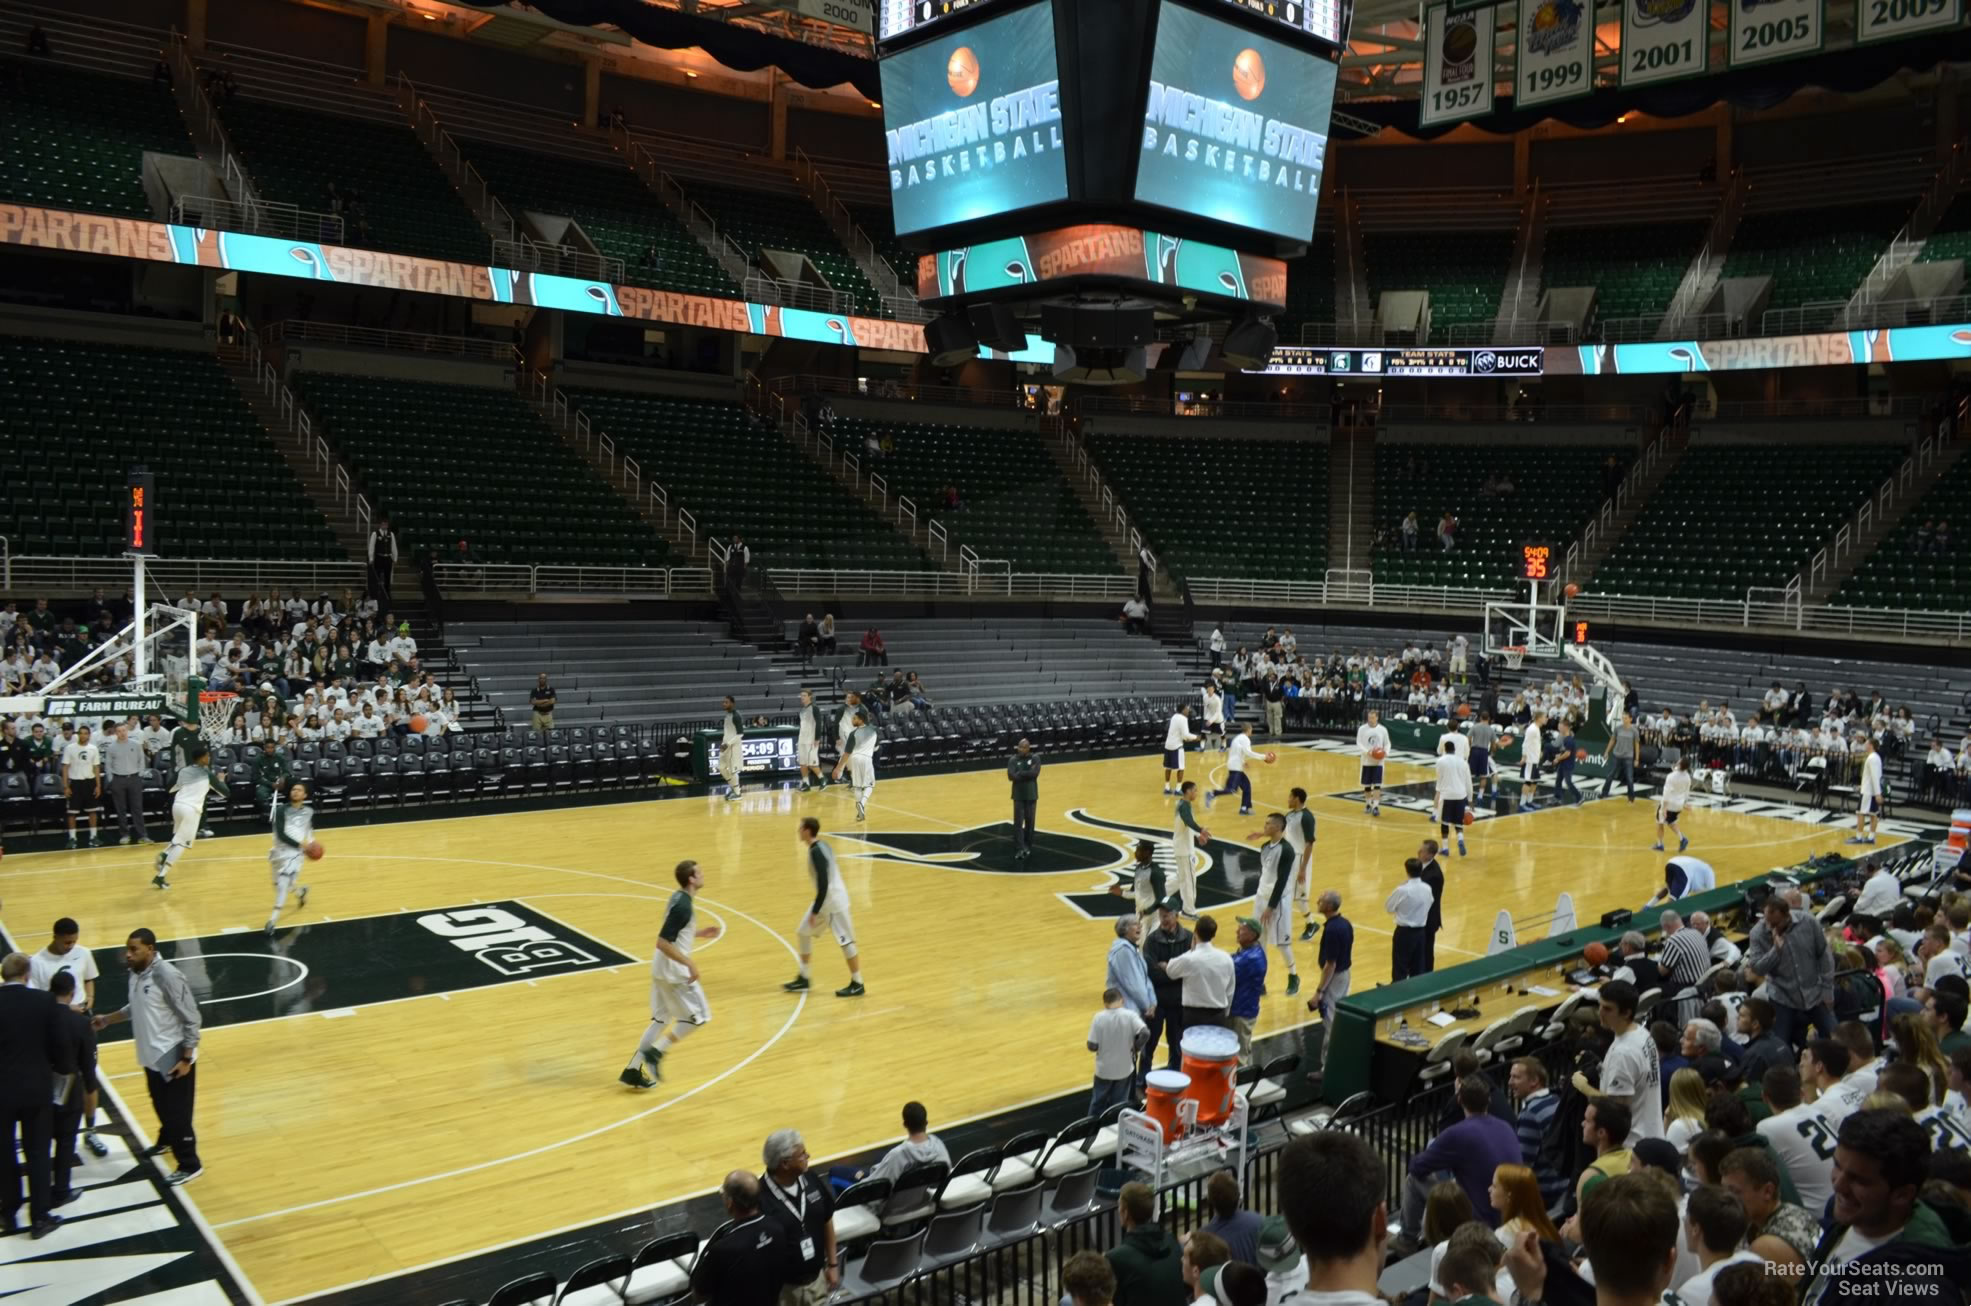 section 113, row 13 seat view  - breslin center